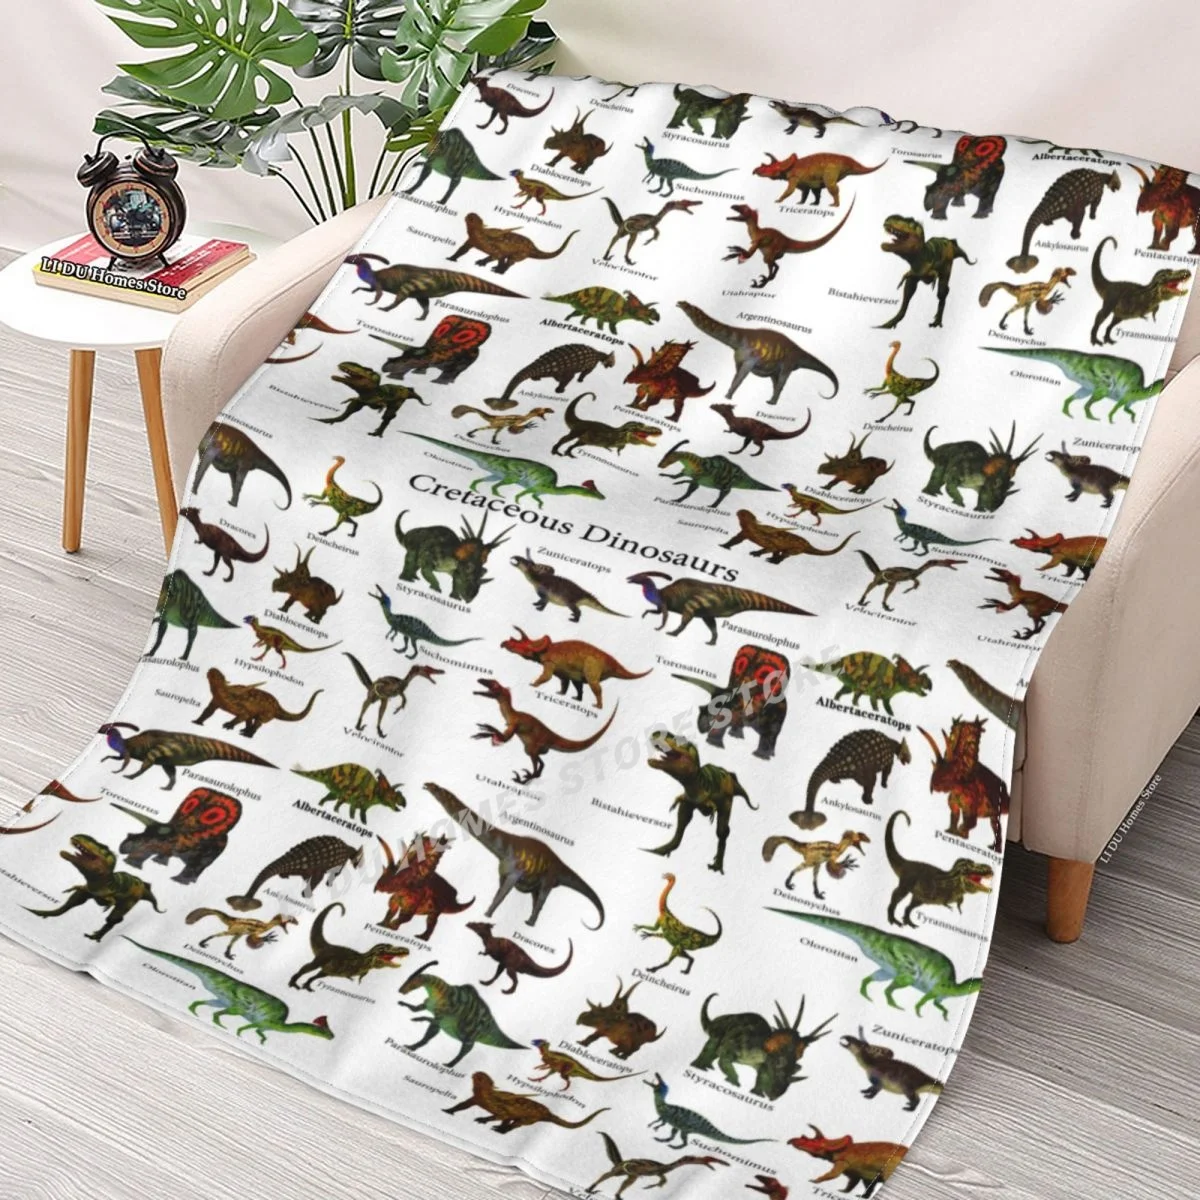 

Cretaceous Dinosaurs Throw Blanket flannel Collage Blanket Bedding soft Cover Bedspreads Blankets